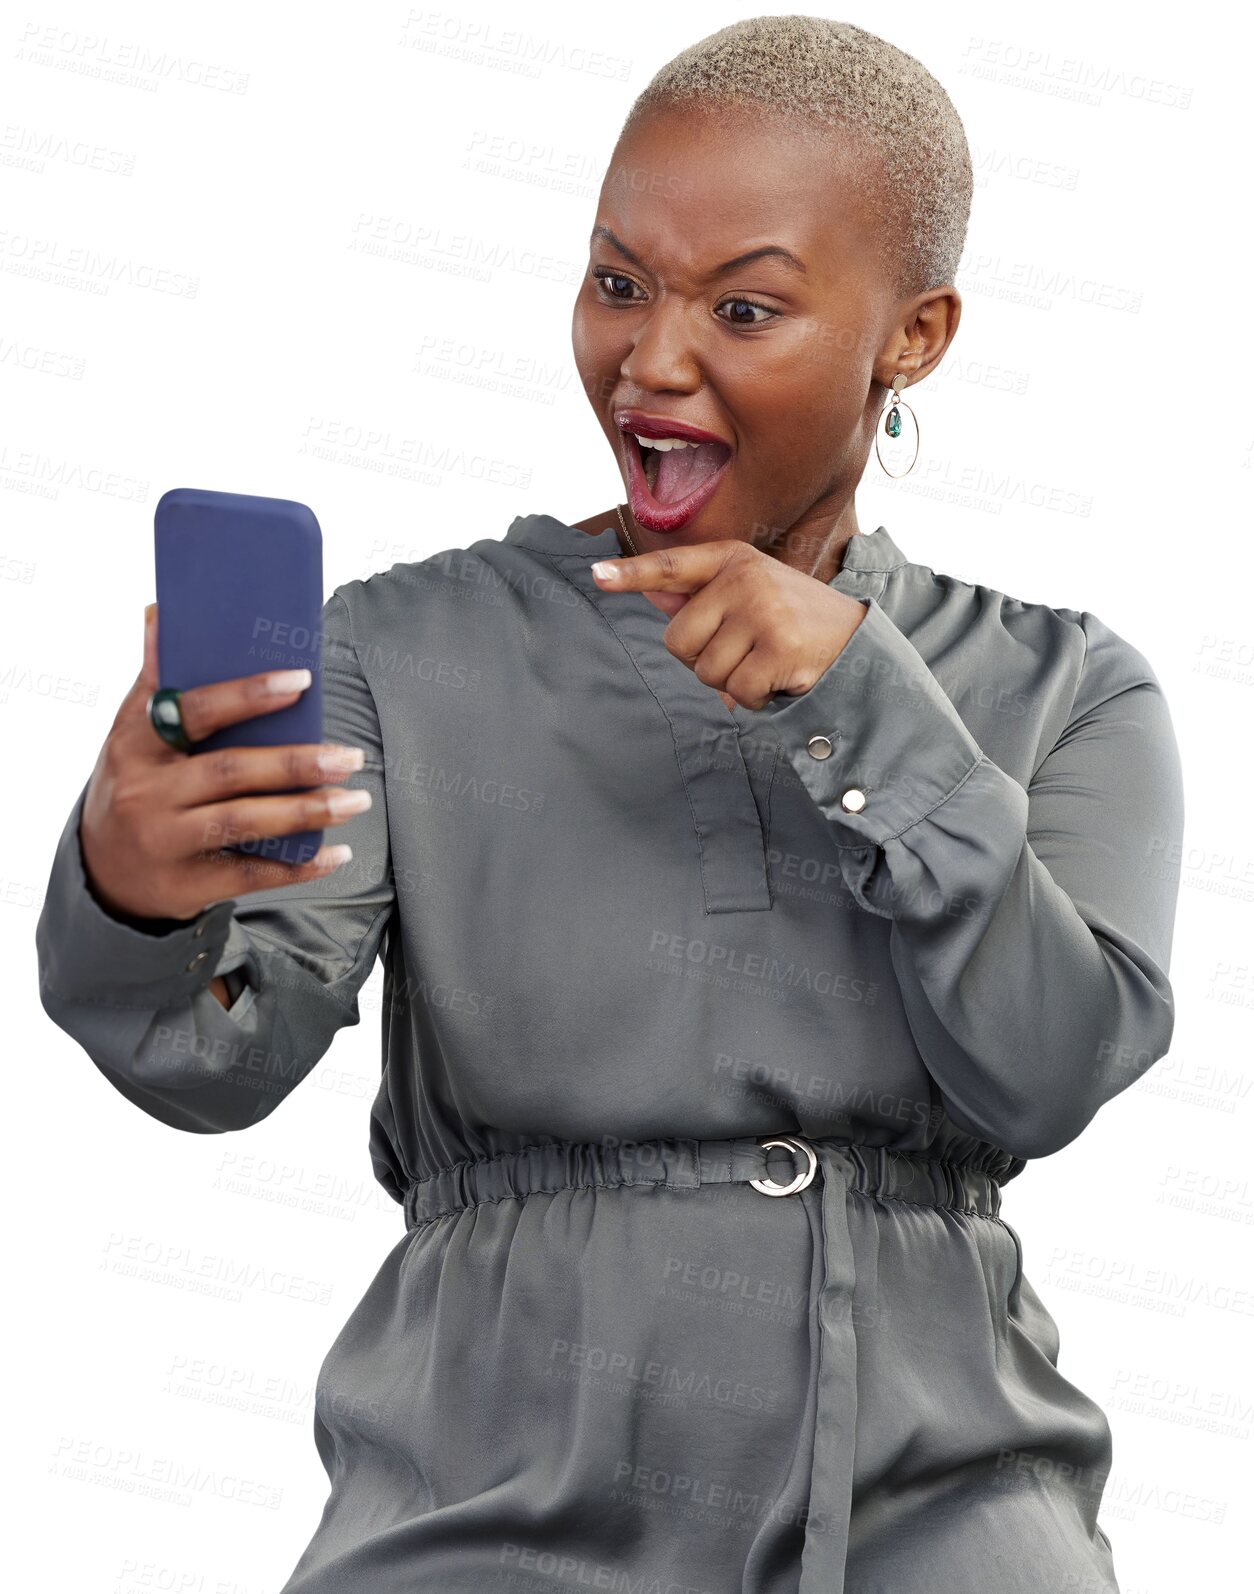 Buy stock photo Wow, phone and surprise black woman pointing at an app or website promo isolated in a transparent or png background. Shocked, amazed and African person excited for internet deal, sale or promotion